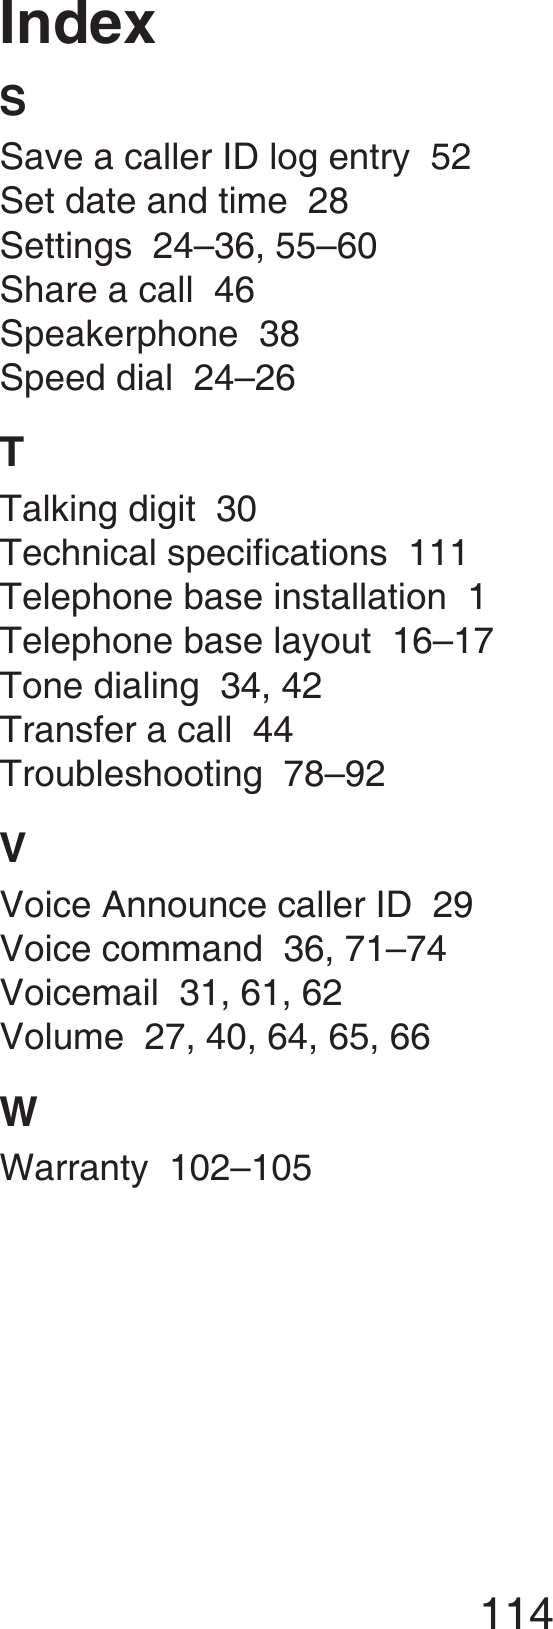 114IndexSSave a caller ID log entry  52Set date and time  28Settings  24–36, 55–60Share a call  46Speakerphone  38Speed dial  24–26TTalking digit  30Technical specifications  111Telephone base installation  1Telephone base layout  16–17Tone dialing  34, 42Transfer a call  44Troubleshooting  78–92VVoice Announce caller ID  29Voice command  36, 71–74Voicemail  31, 61, 62Volume  27, 40, 64, 65, 66WWarranty  102–105